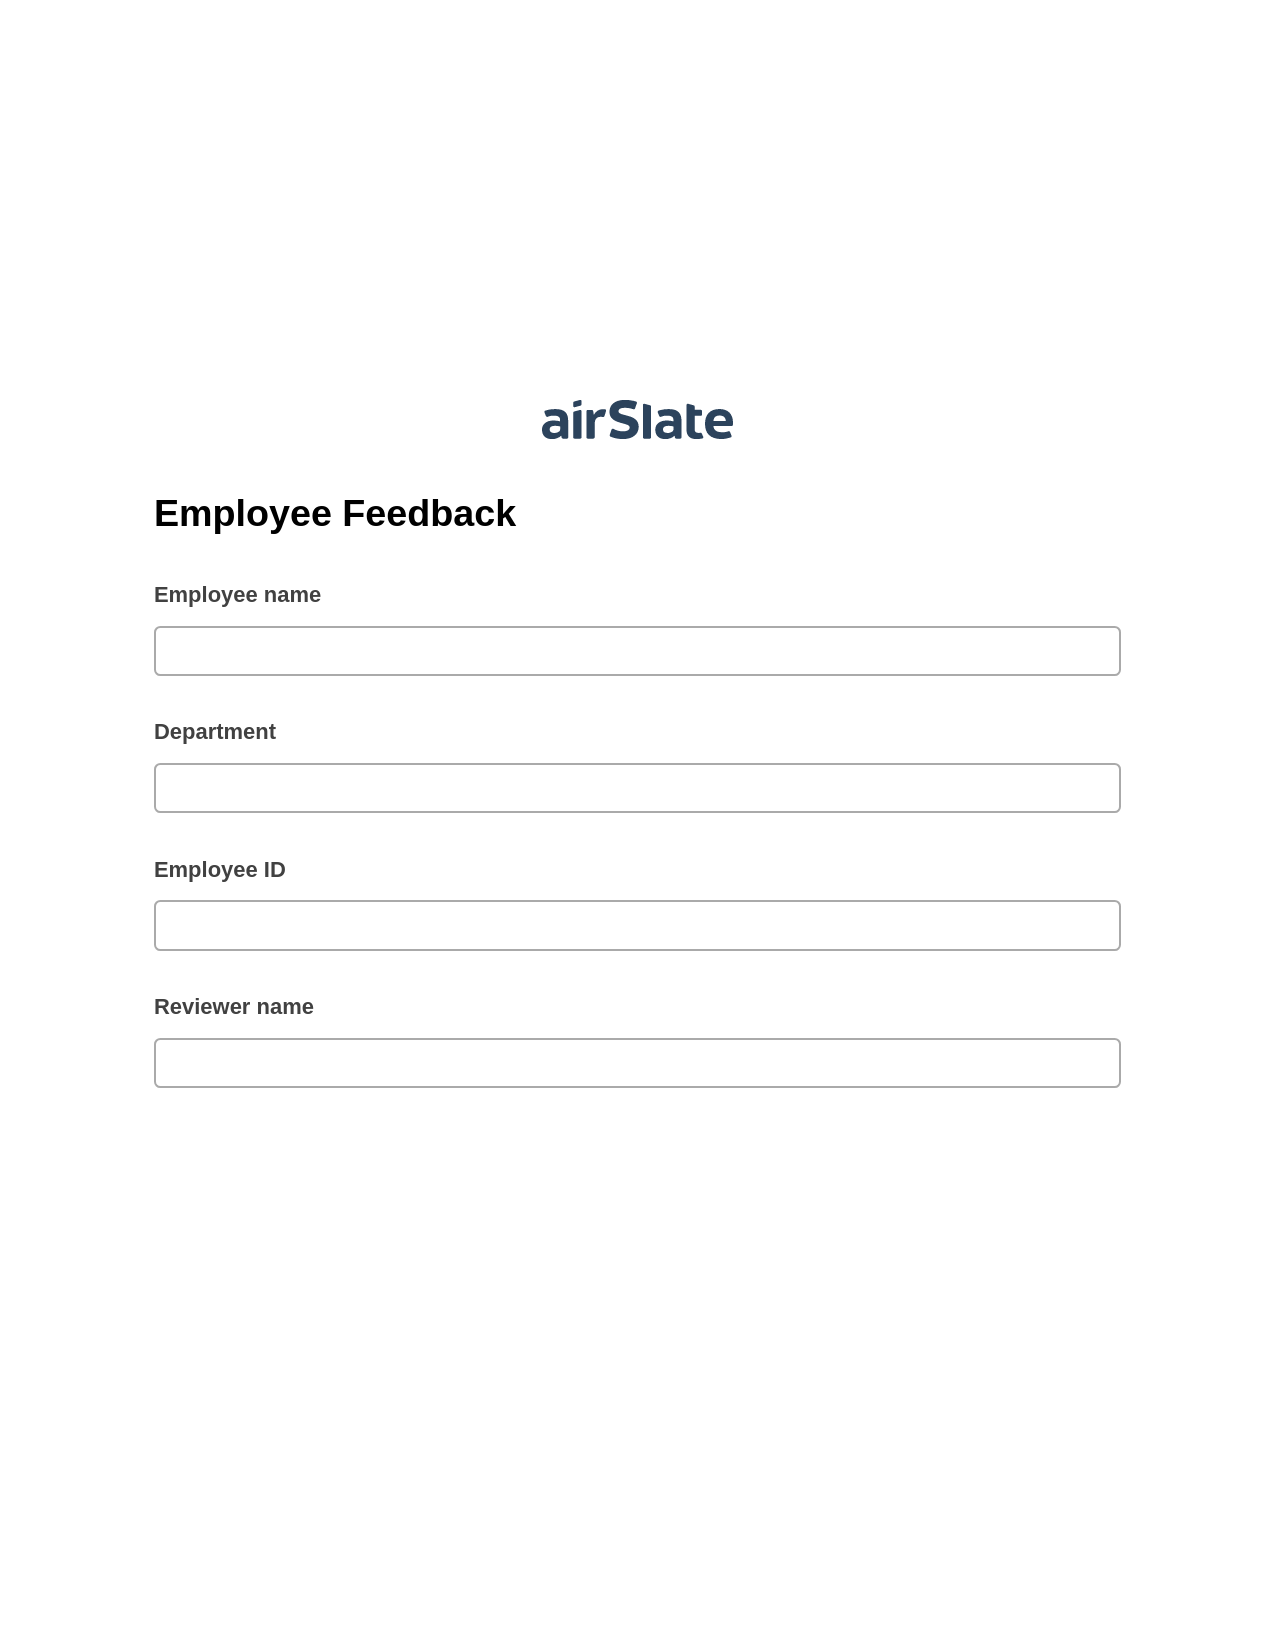 Multirole Employee Feedback Pre-fill from Salesforce Record Bot, Unassign Role Bot, Export to Google Sheet Bot